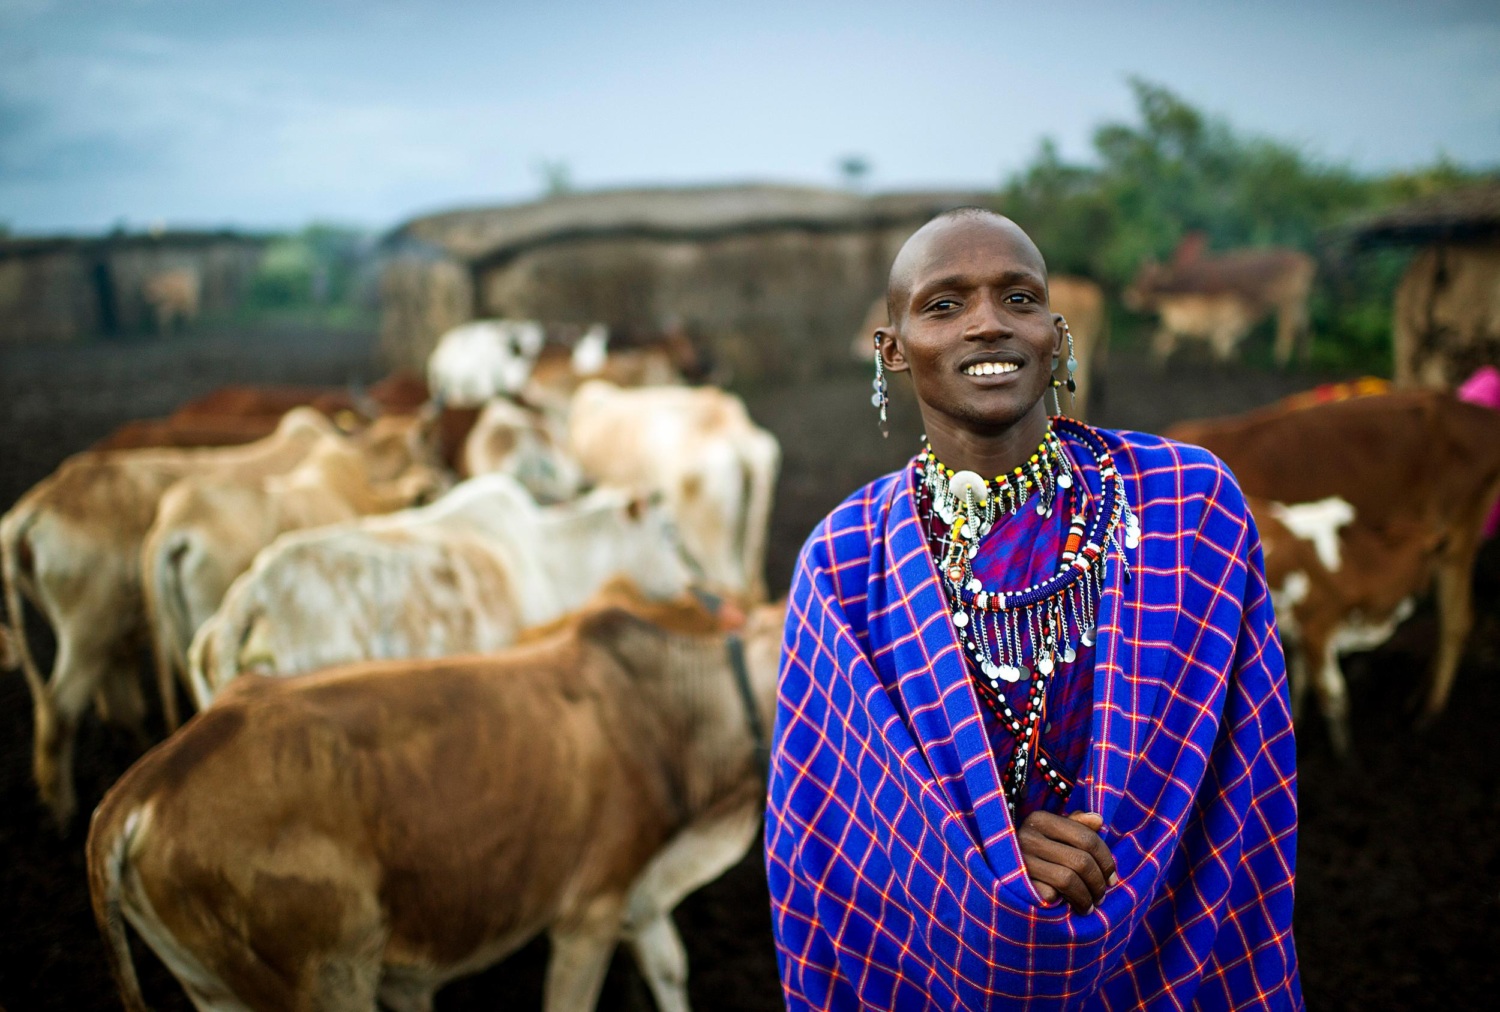 Maasai man (28) smiling, looking at the camera, stands in front of his cattle at home in the evening.